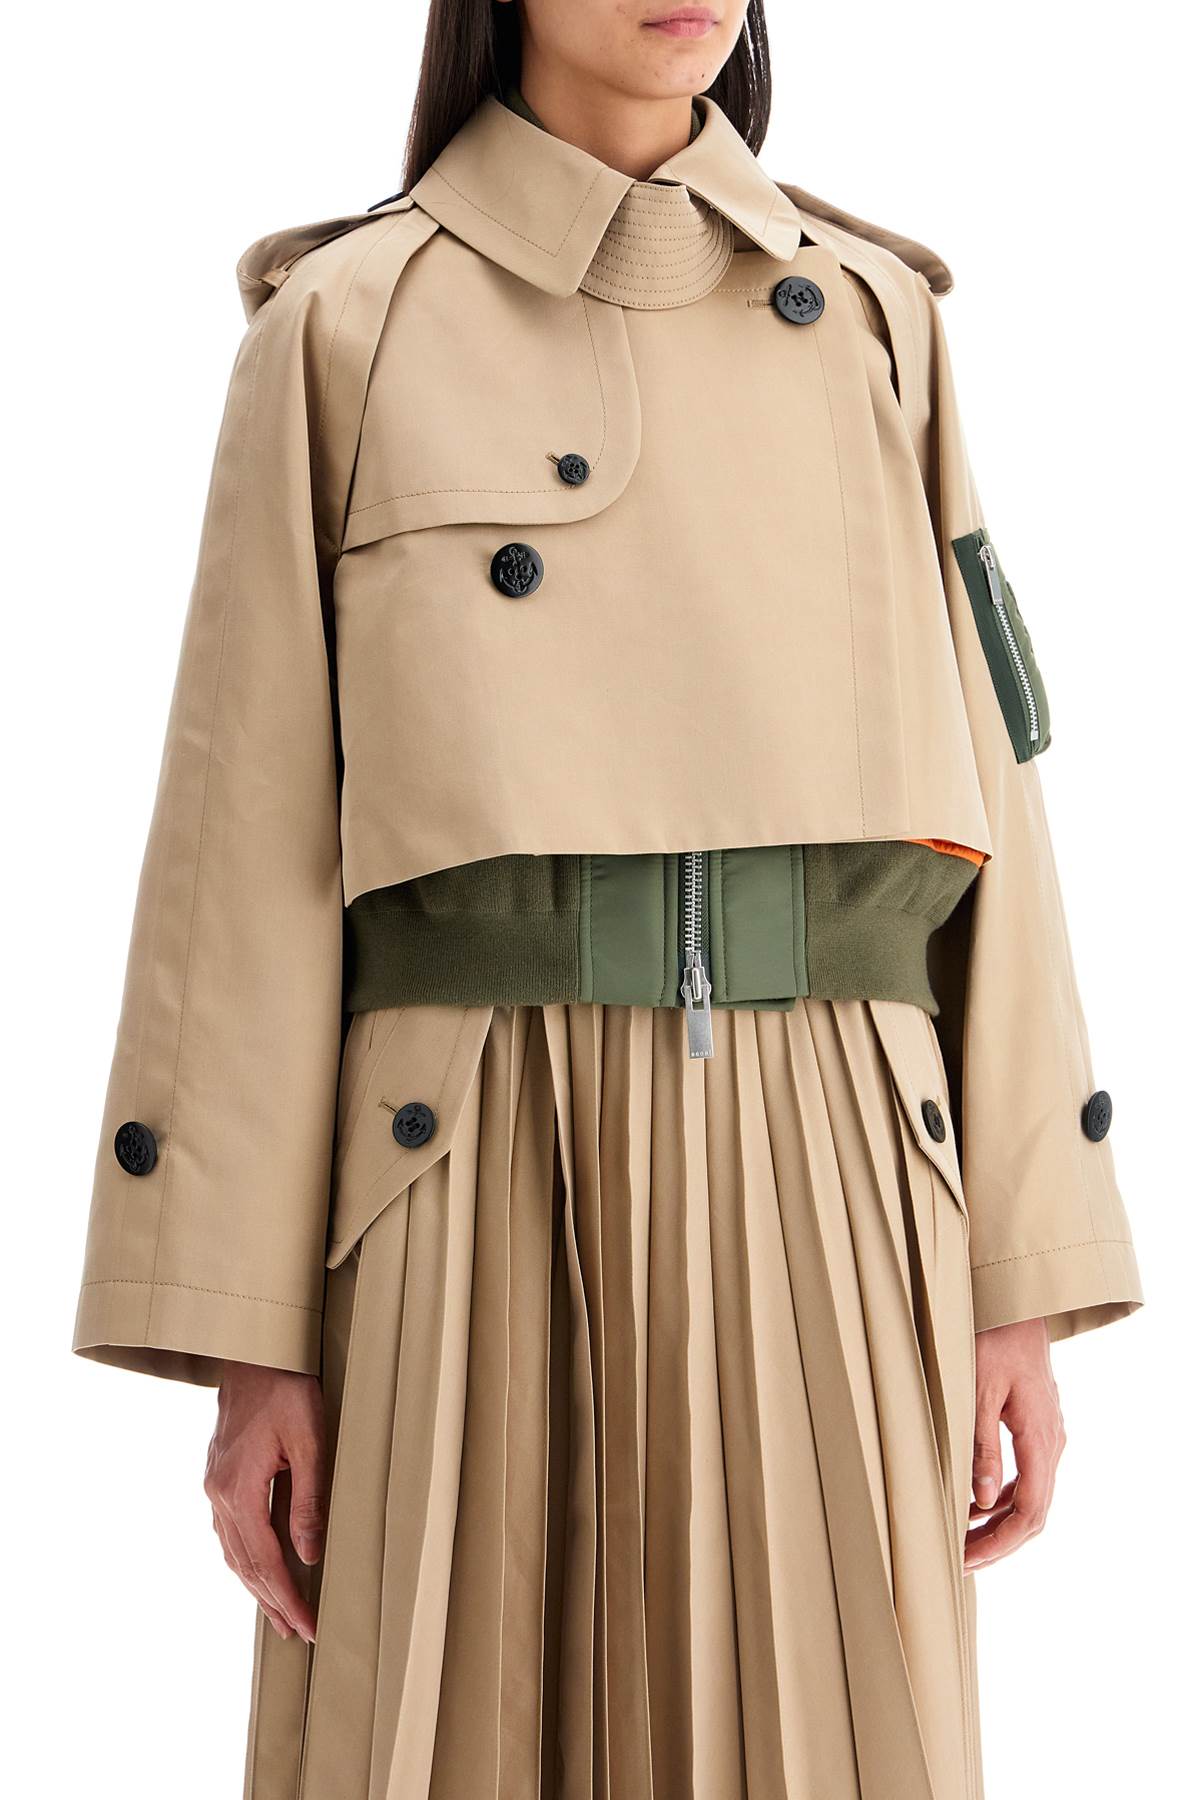 layered effect trench-style blous-1